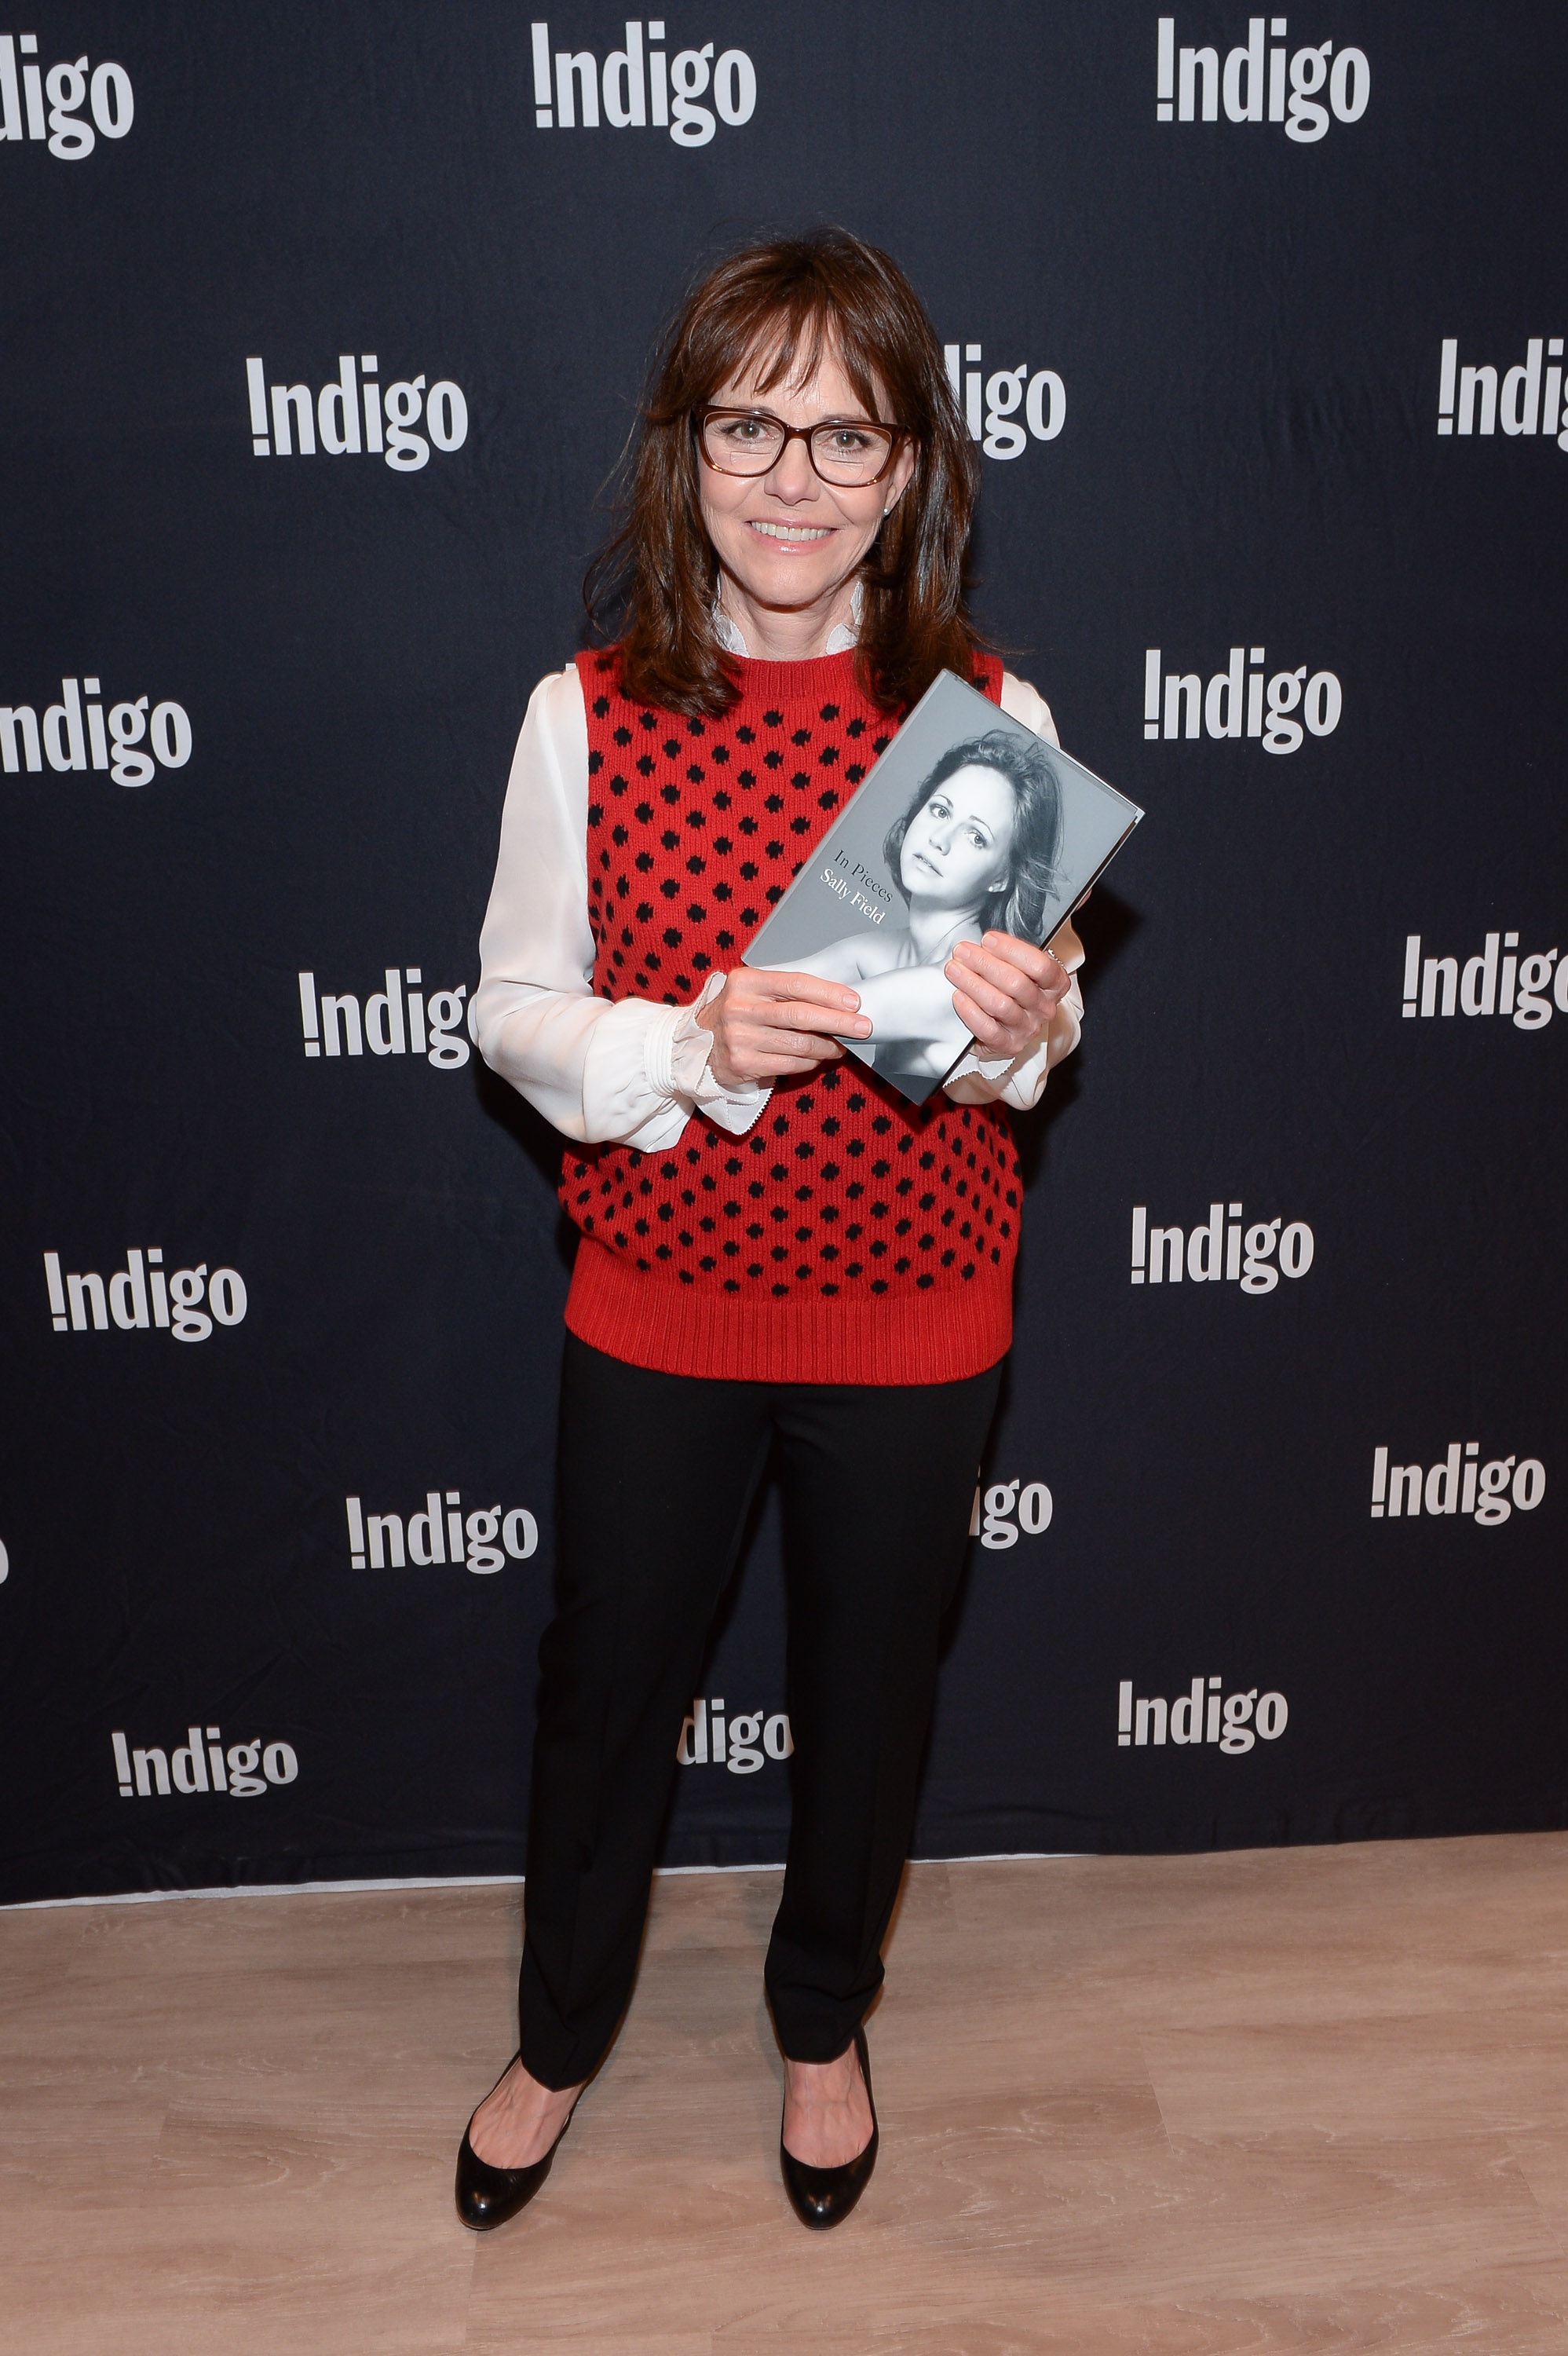 Sally Field at a book signing event for her memoir "In Pieces" in Toronto, Canada on October 9, 2018 | Source: Getty Images